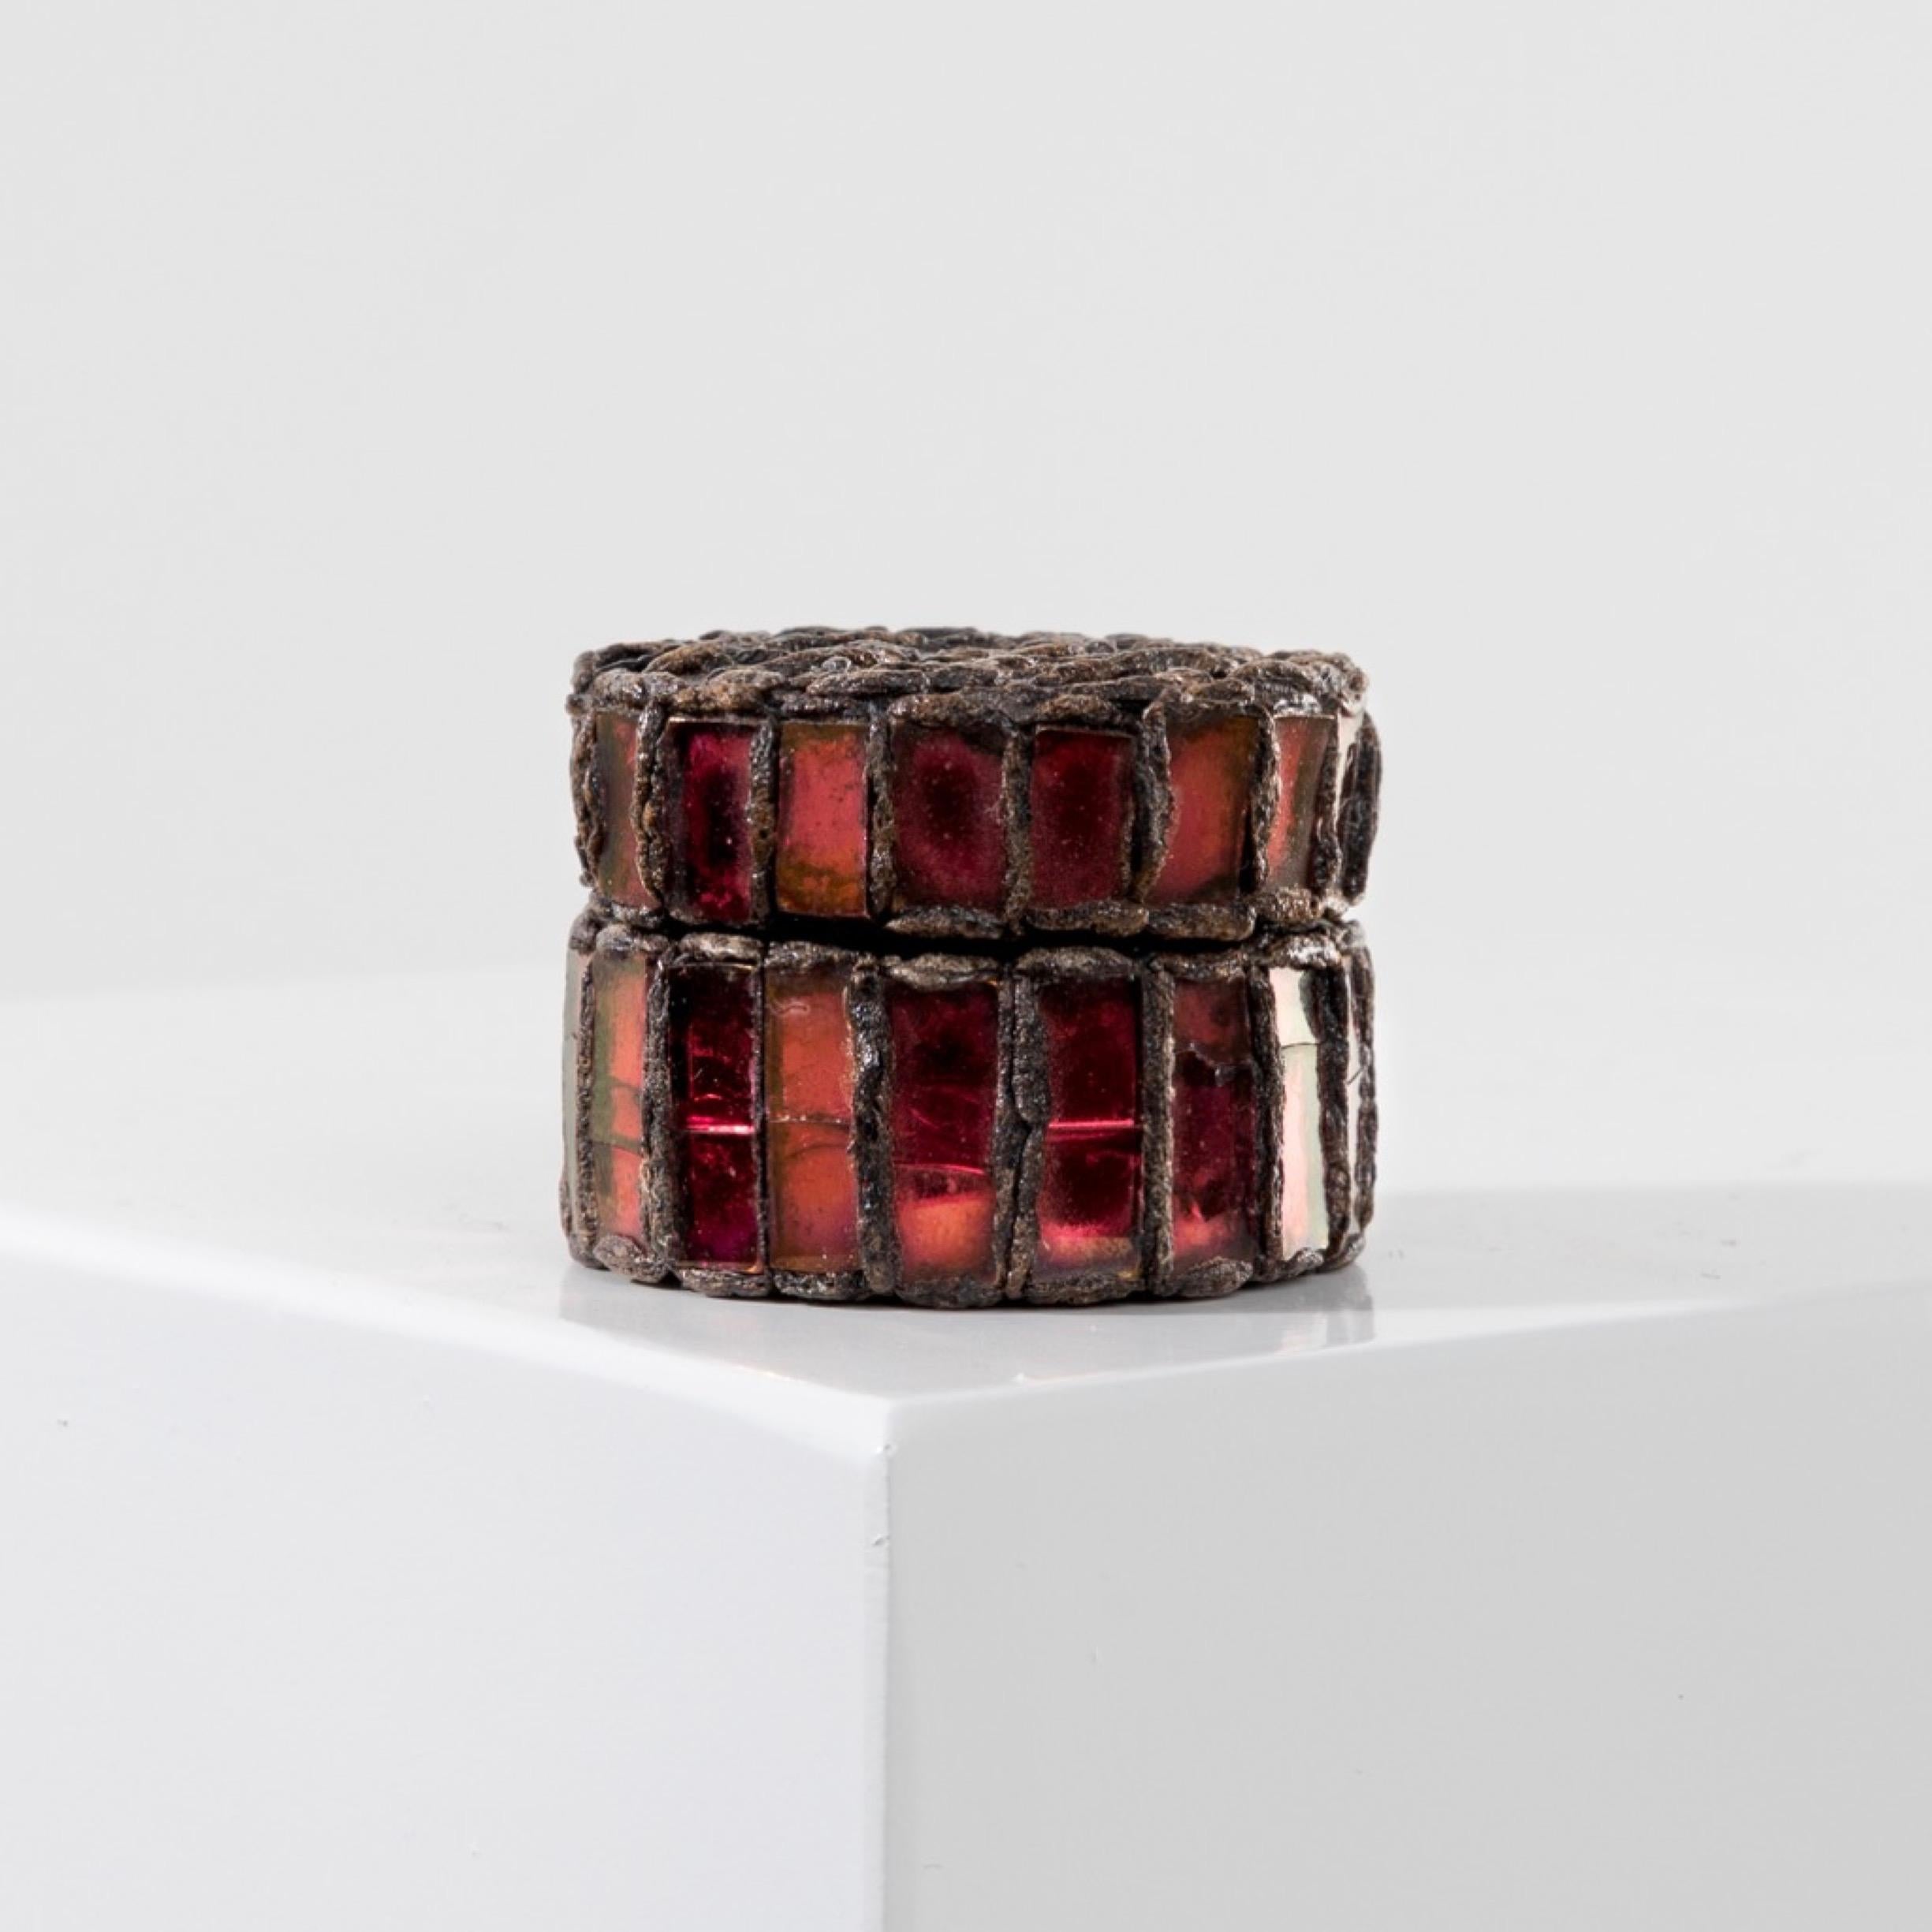 Mirror Pill box by Line Vautrin- Talosel encrusted with garnet red mirrors For Sale